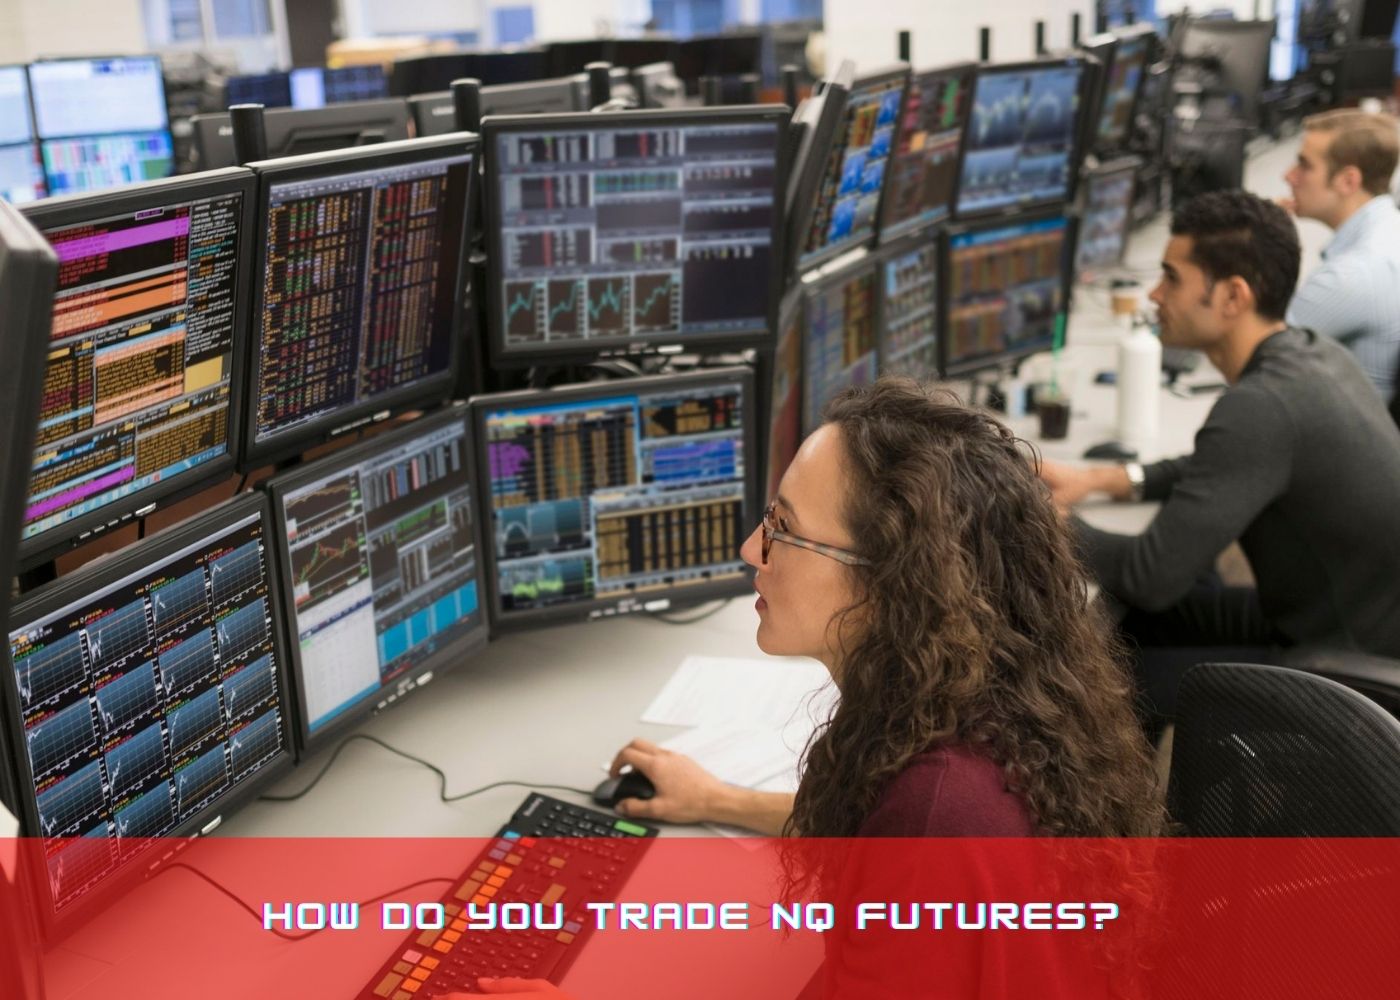 How Many NQ Futures Contracts Can One Safely Trade During Regular Market Hours?